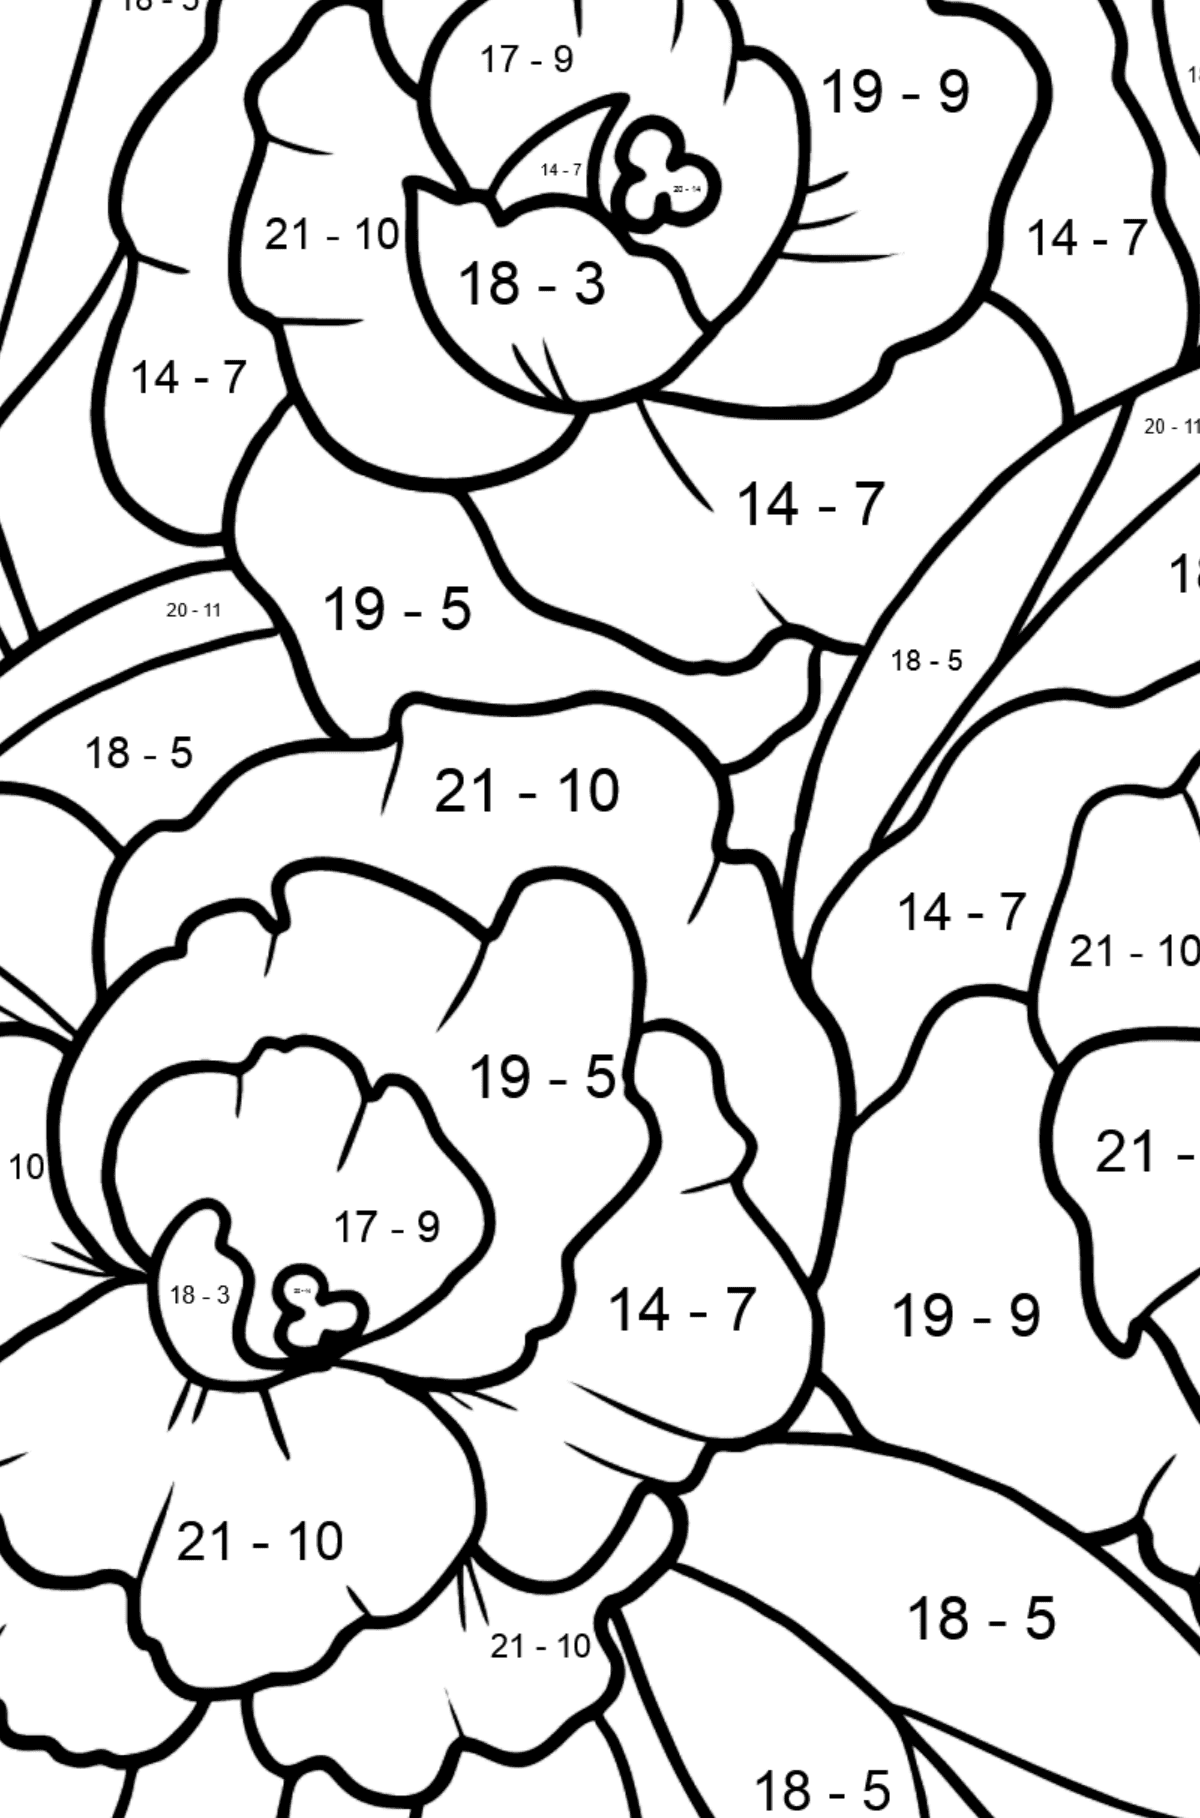 Flower Coloring Page - A Peony Blossom - Math Coloring - Subtraction for Kids